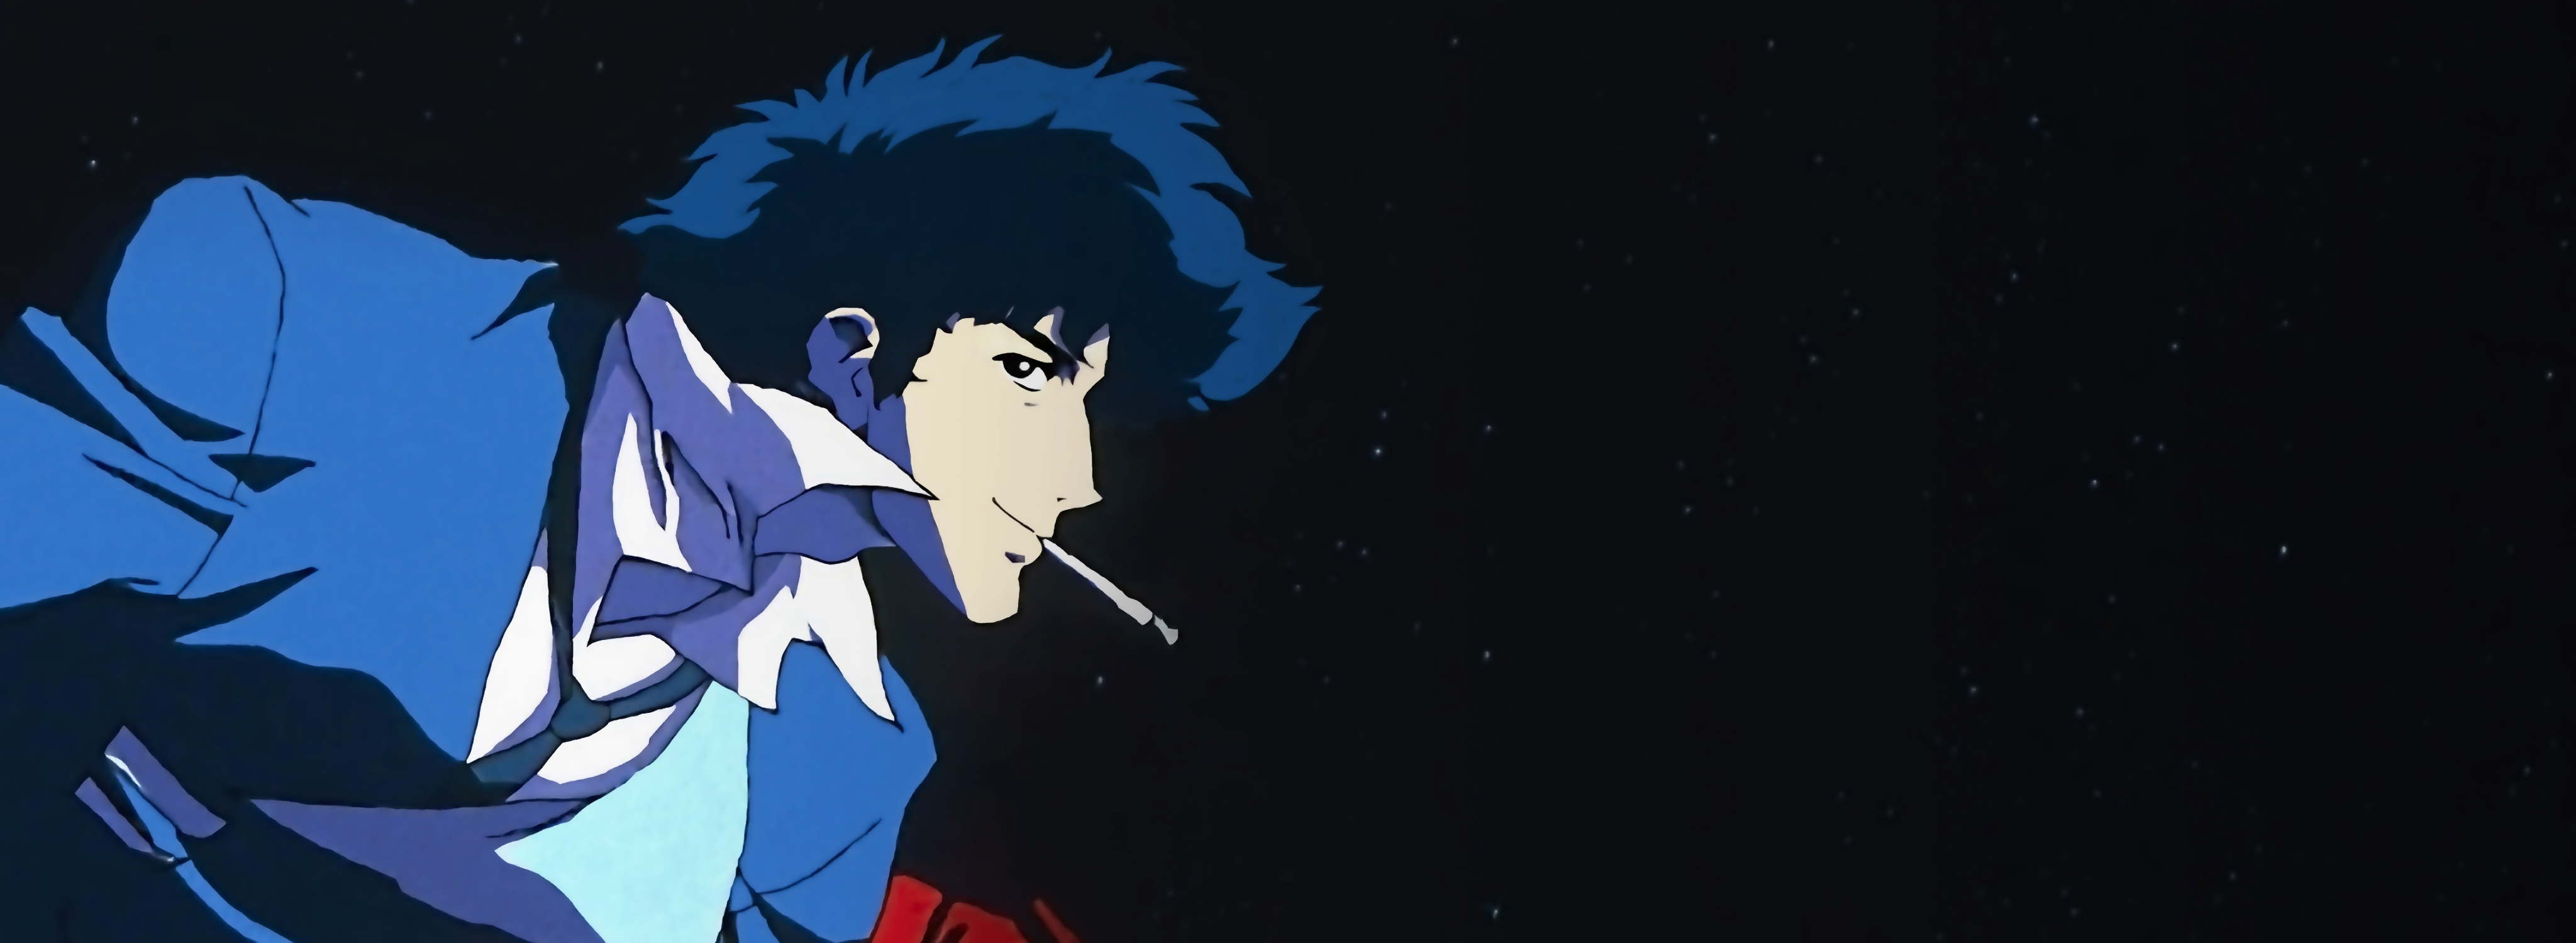 2560x1440 Spike Spiegel Cowboy Bebop 4k Art 1440p Resolution Wallpaper Hd Anime 4k Wallpapers Images Photos And Background